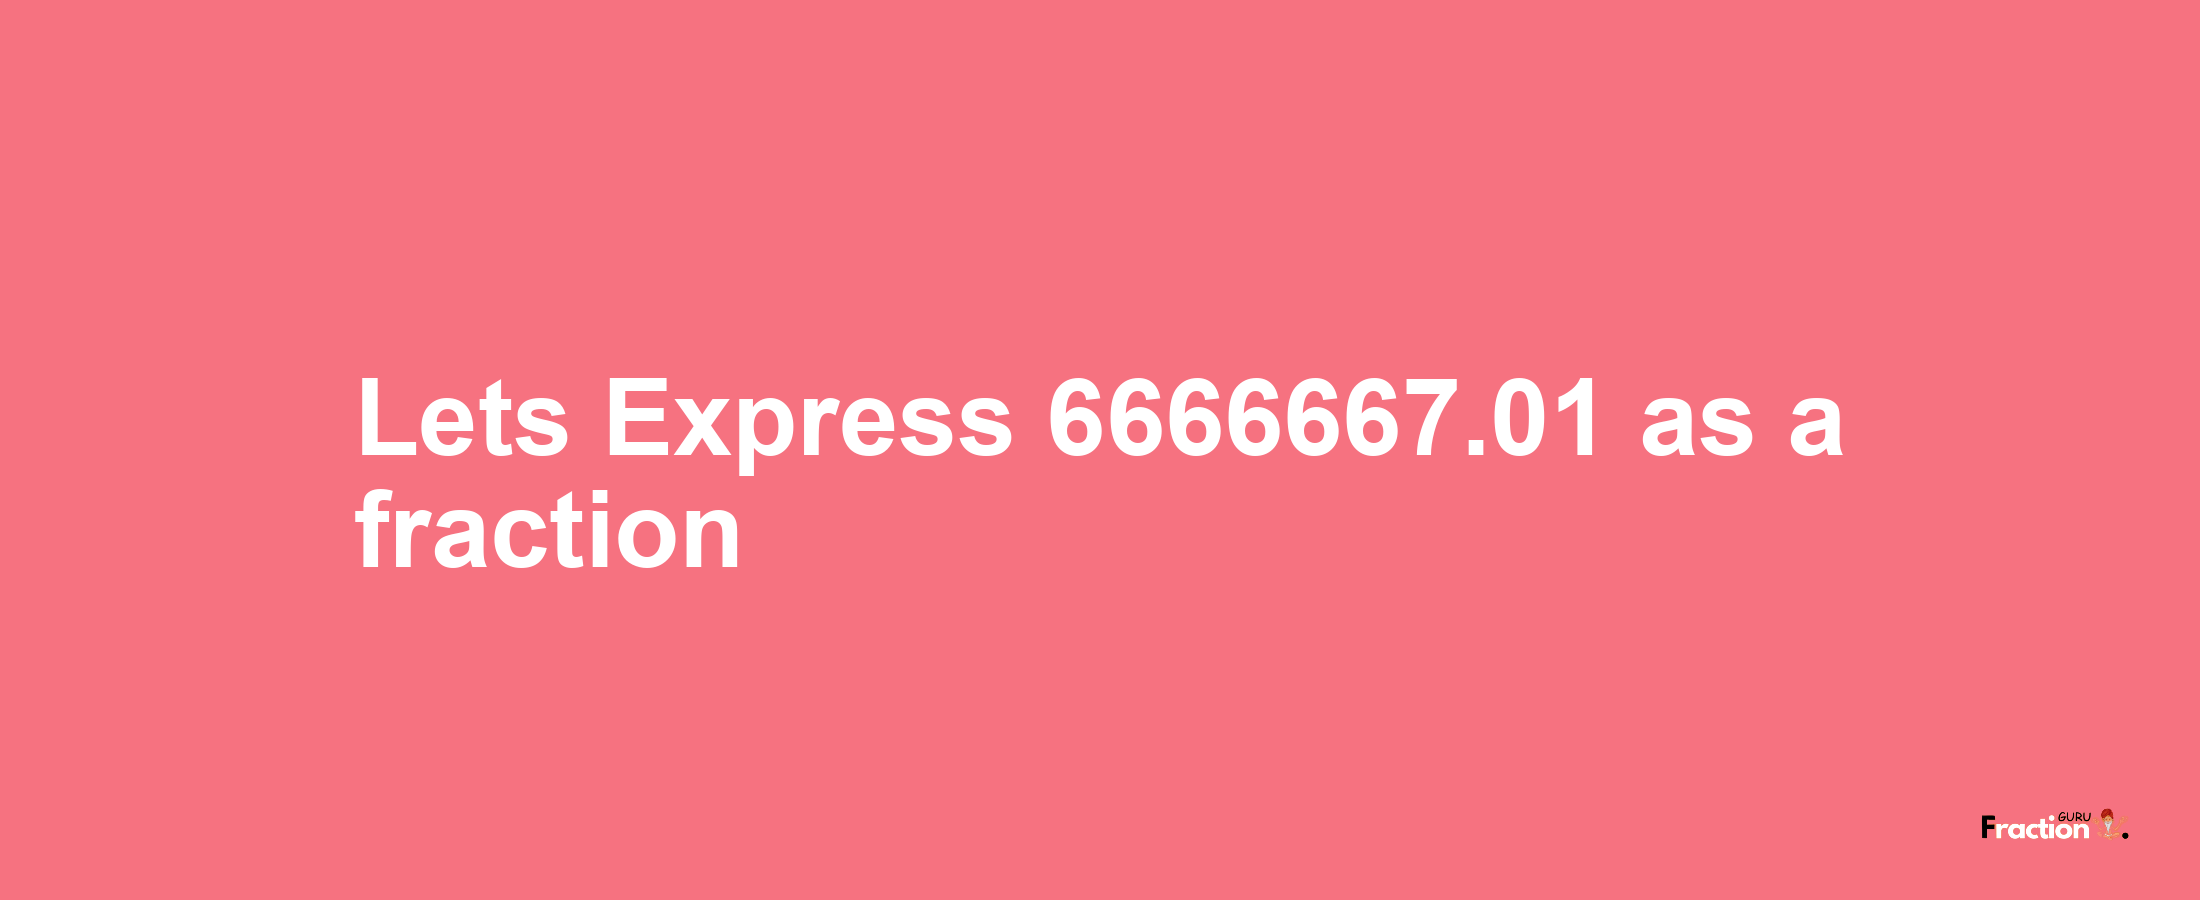 Lets Express 6666667.01 as afraction